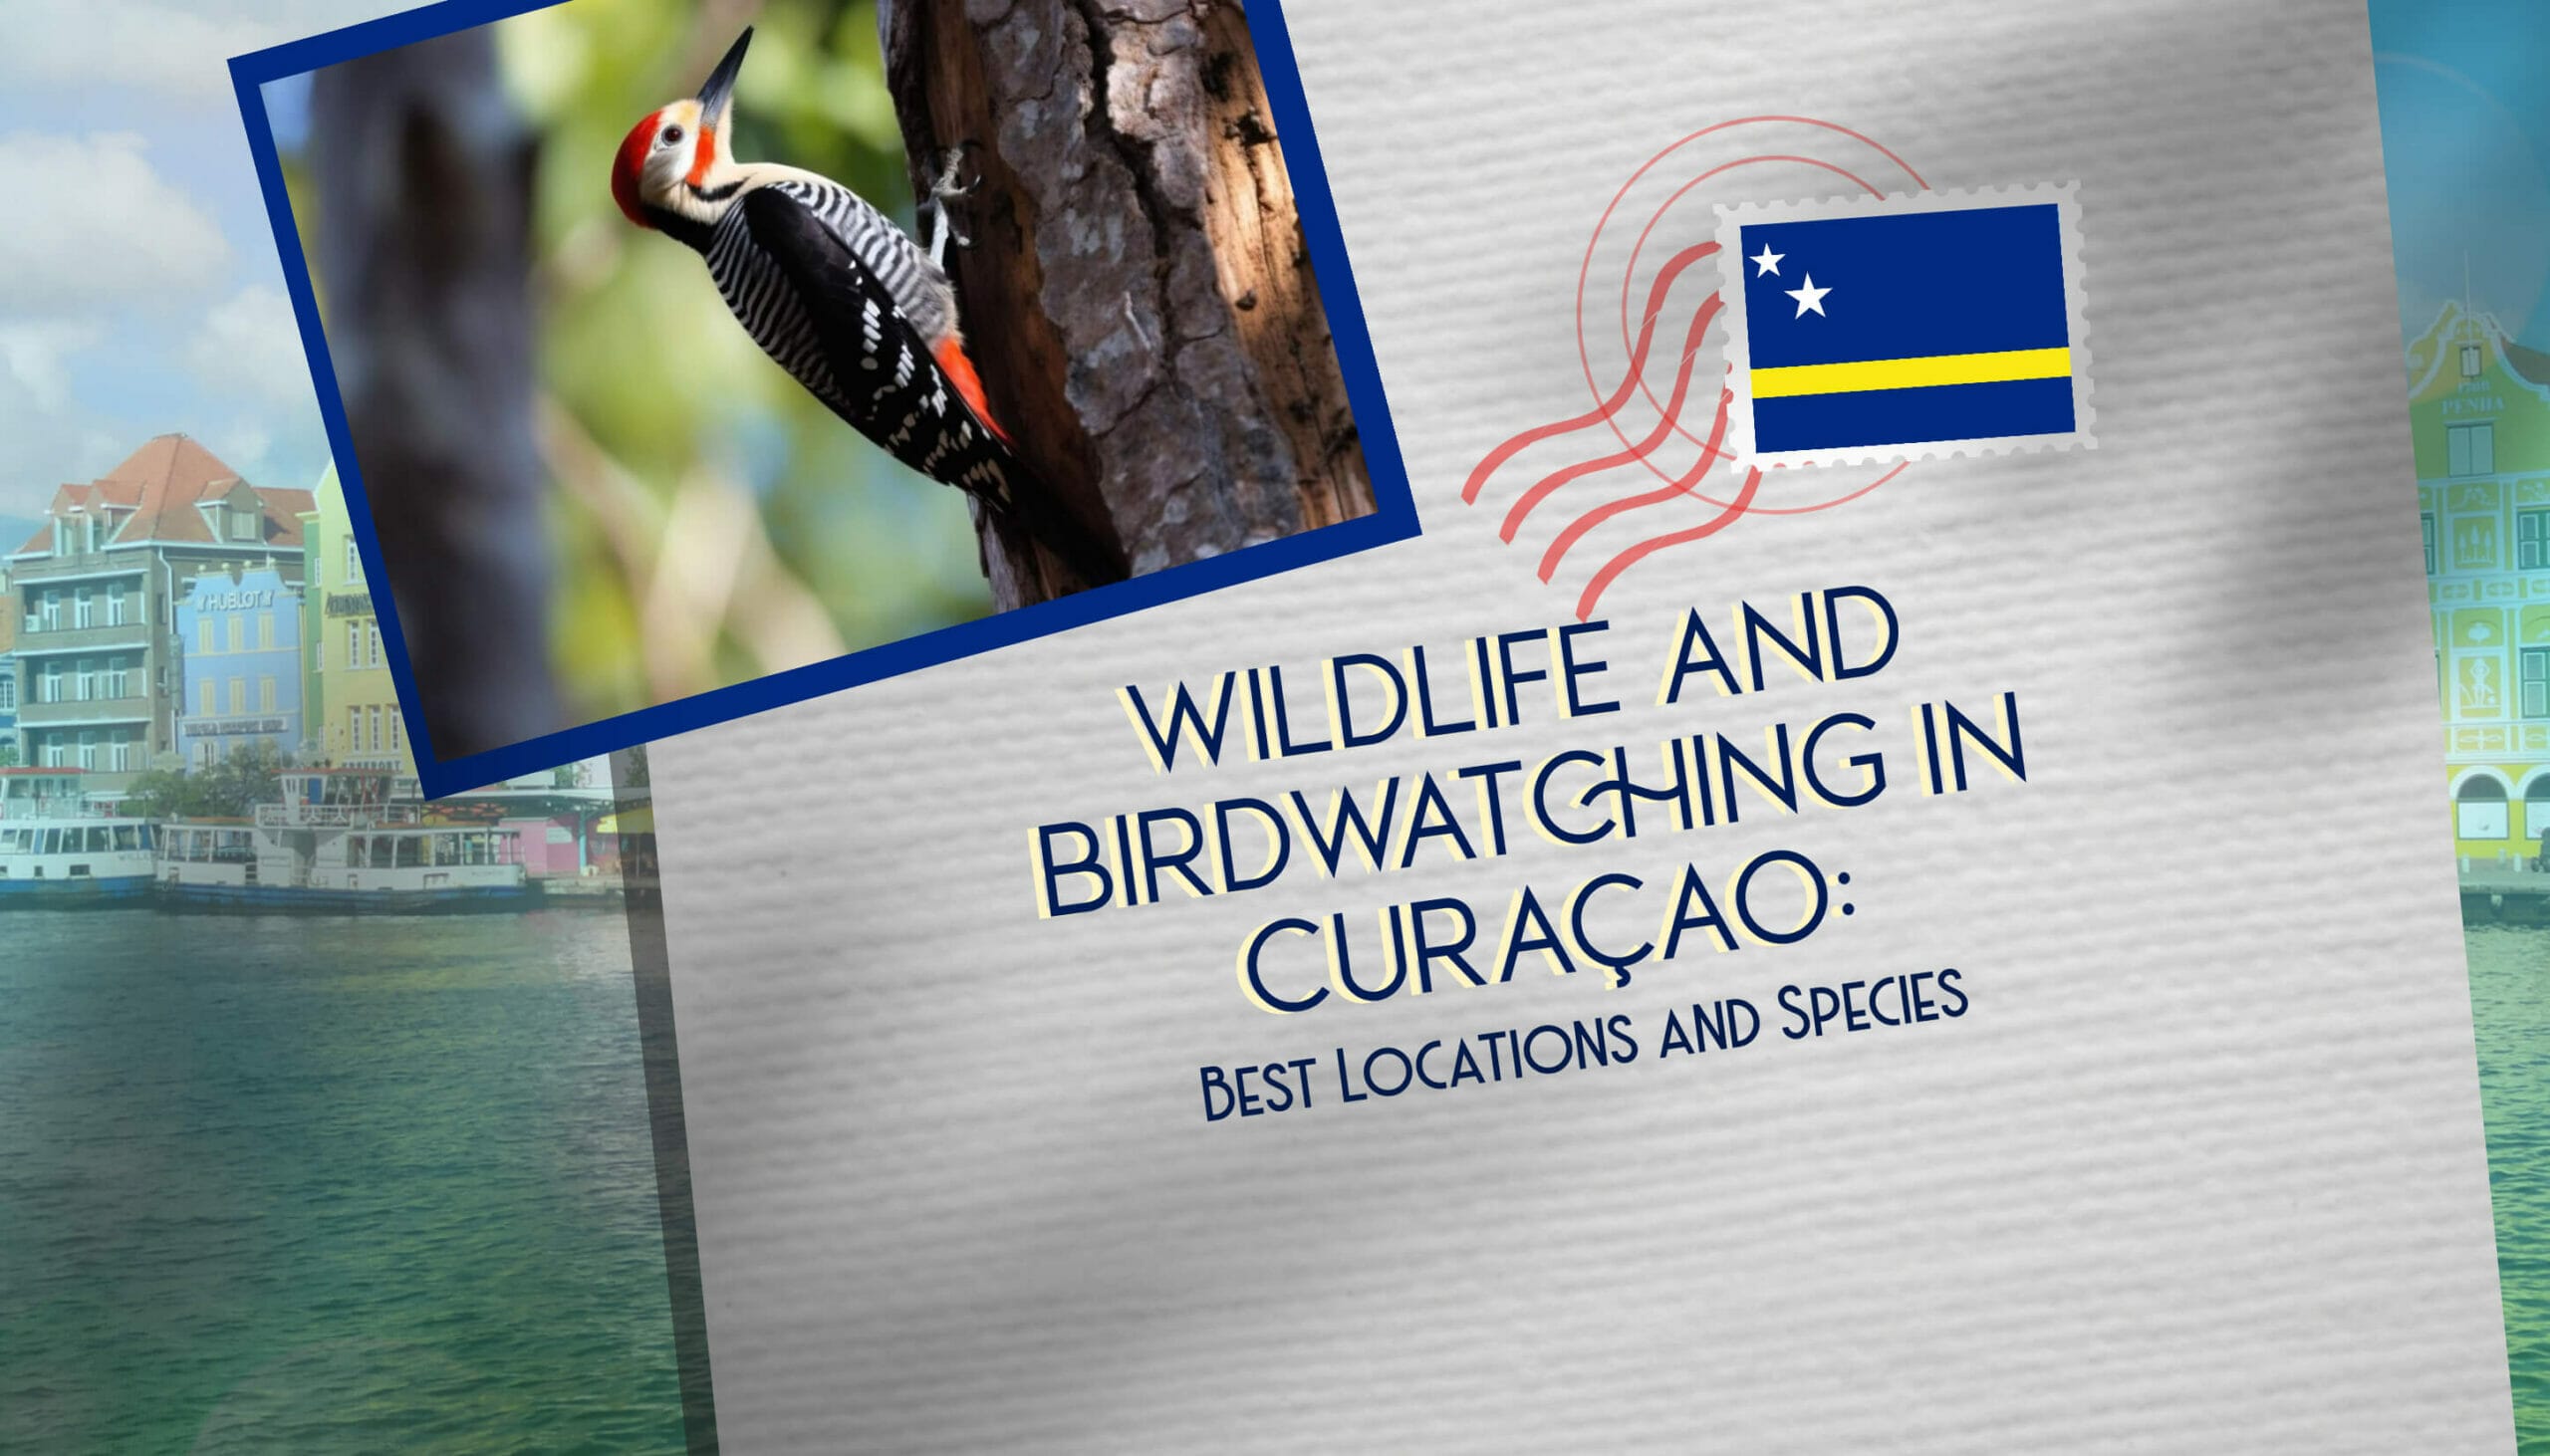 Wildlife and Birdwatching in Curaçao Best Locations and Species